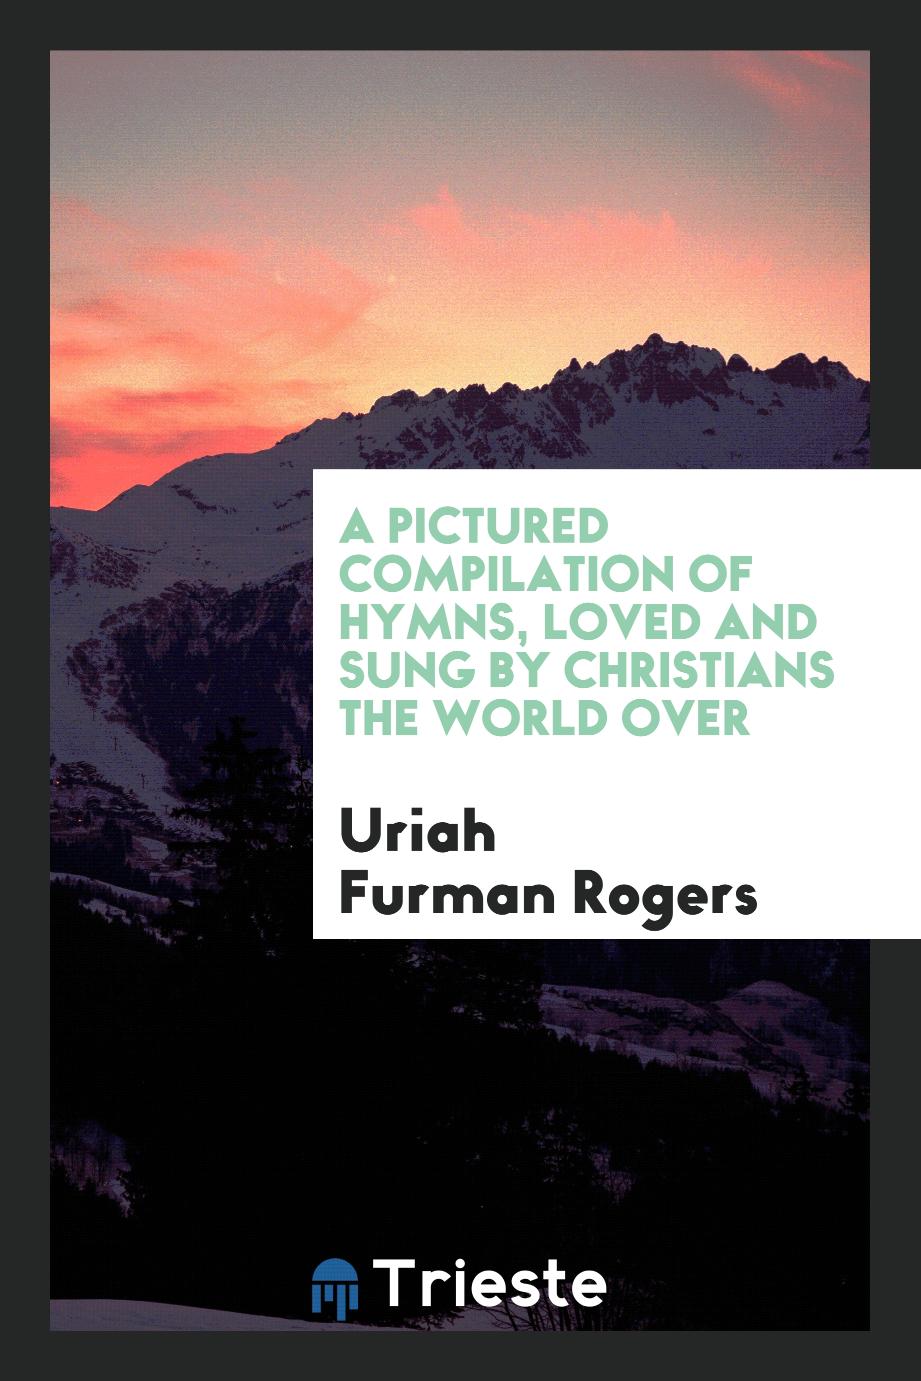 A Pictured Compilation of Hymns, Loved and Sung by Christians the World Over